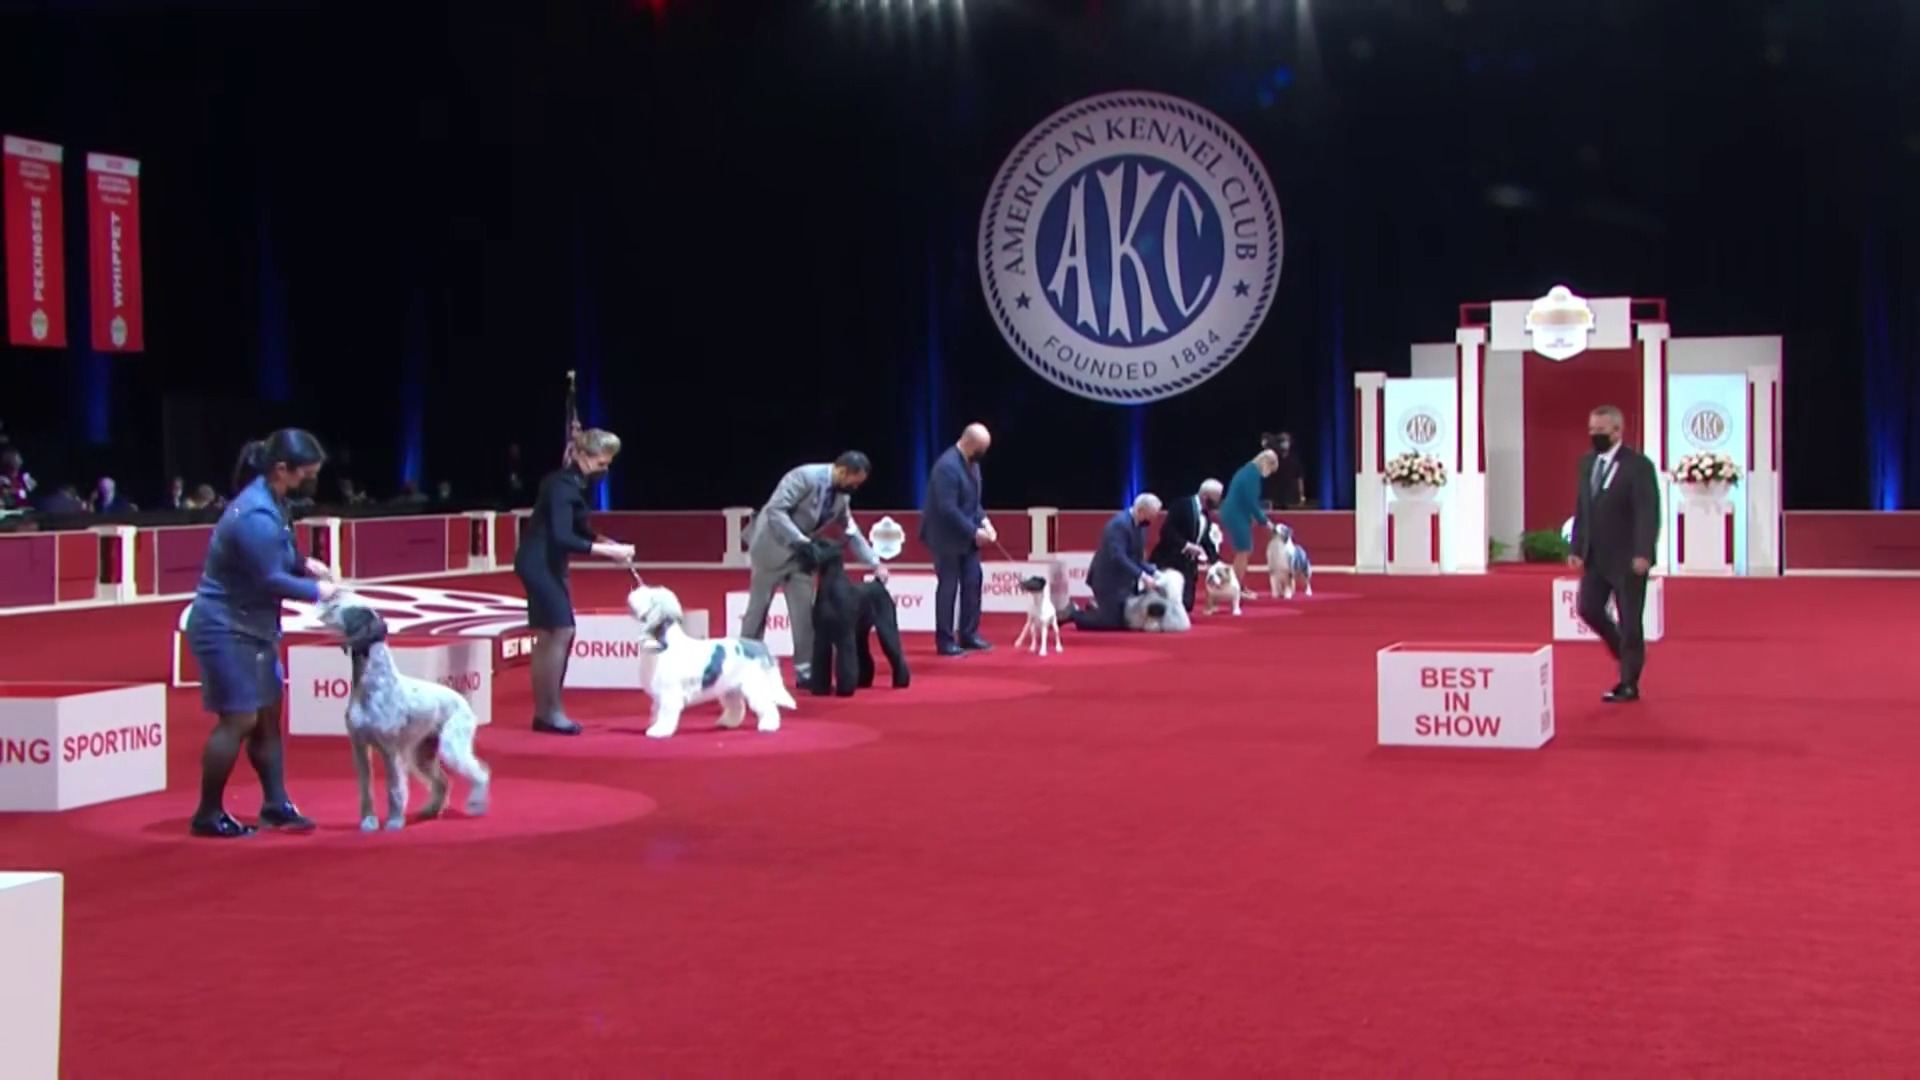 AKC National Championship presented by Royal Canin – American